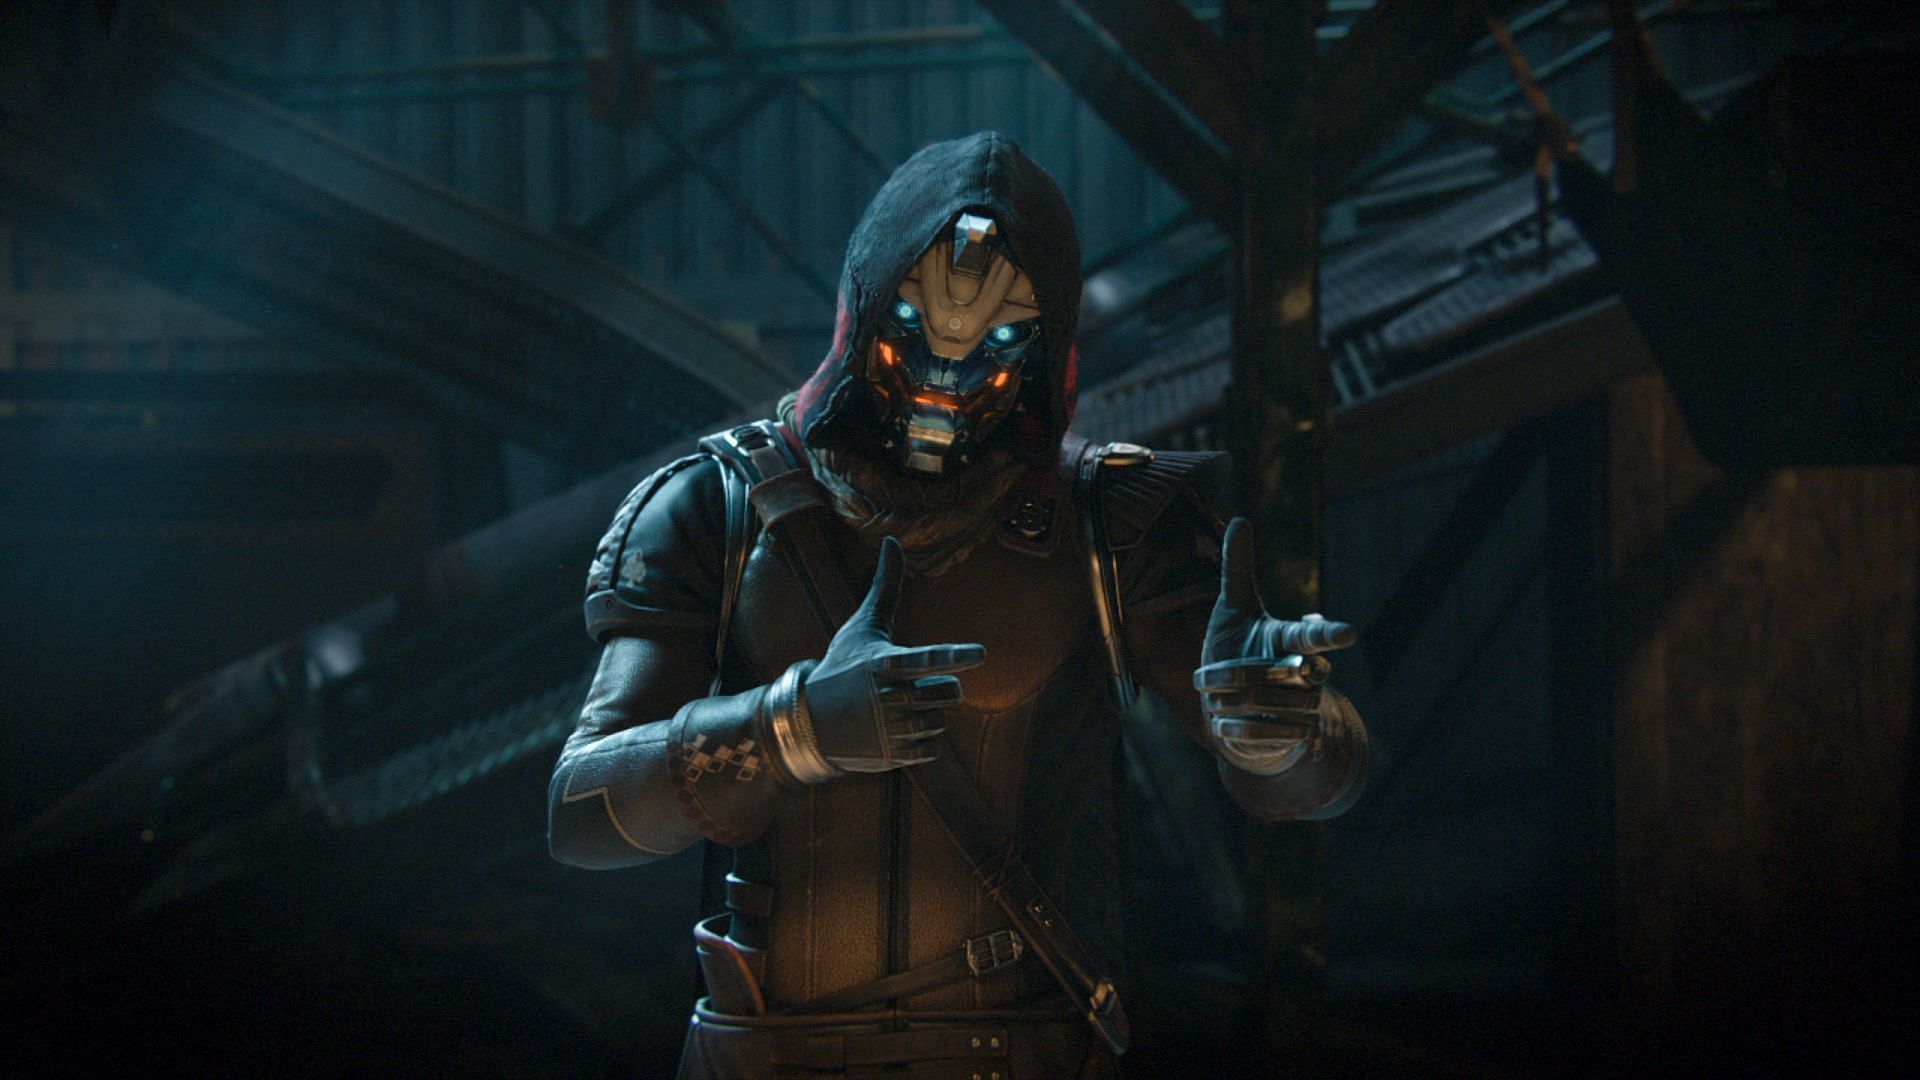 Empire and Nightmare Hunts would be a nice addition to the current Vanguard Ops Playlist in Destiny 2 (Image via Bungie)